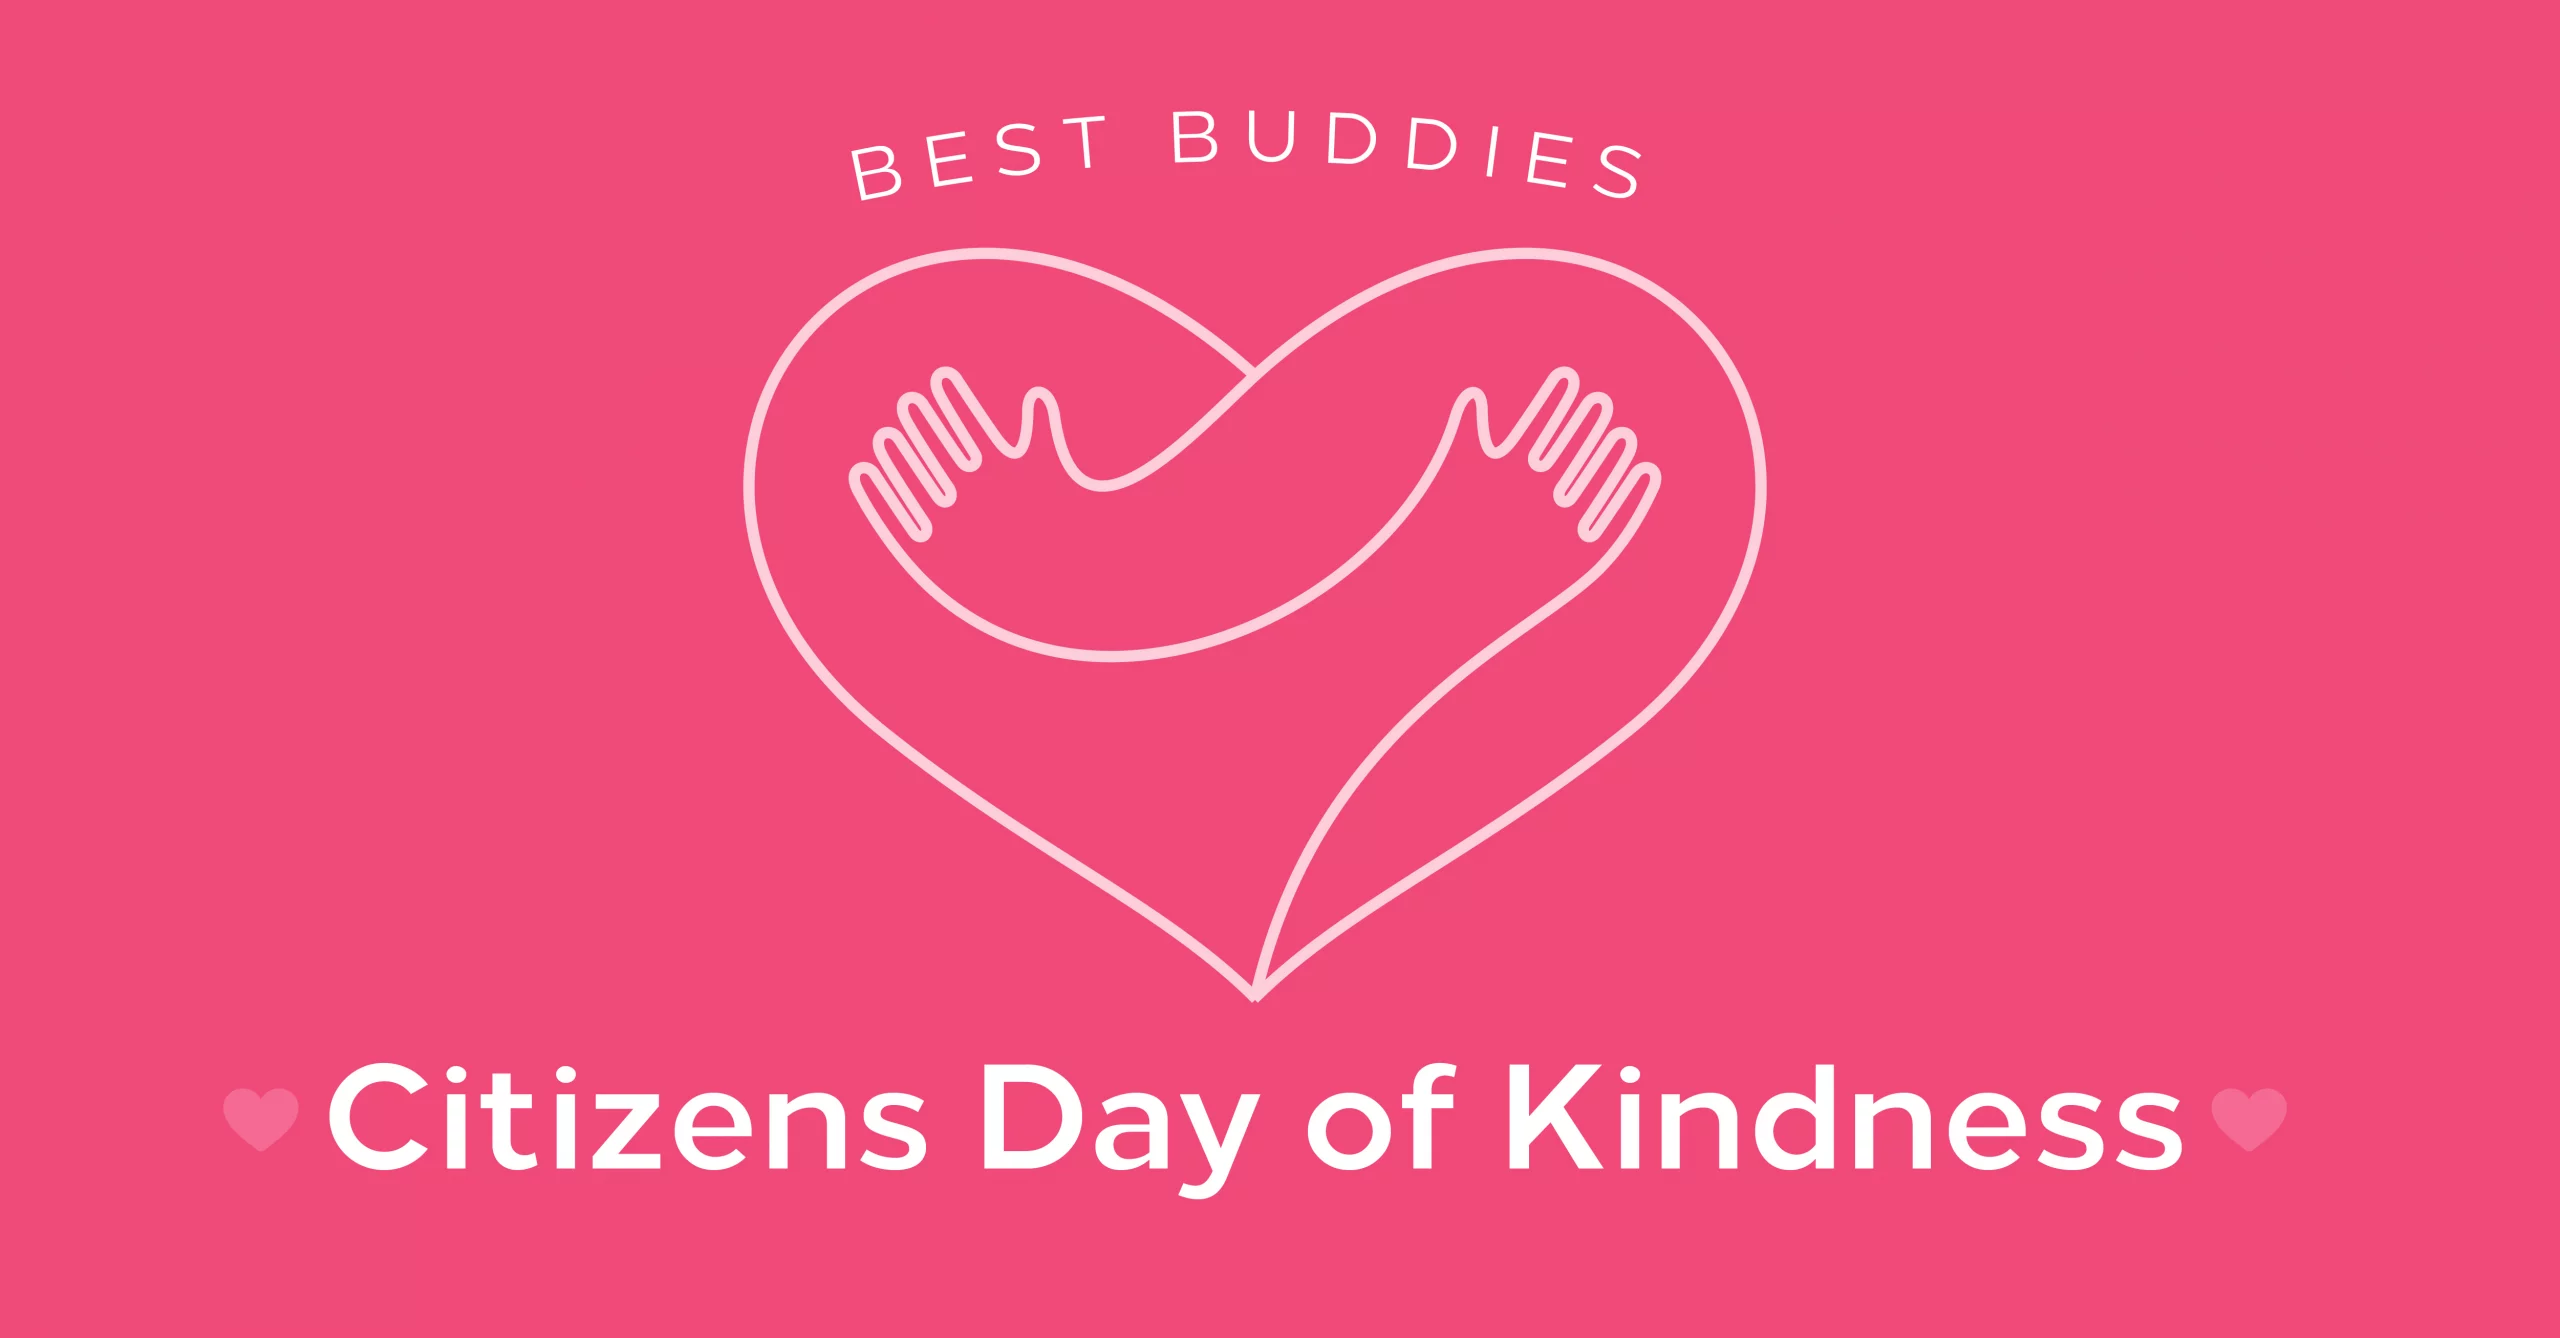 Citizens Day of Kindness graphic